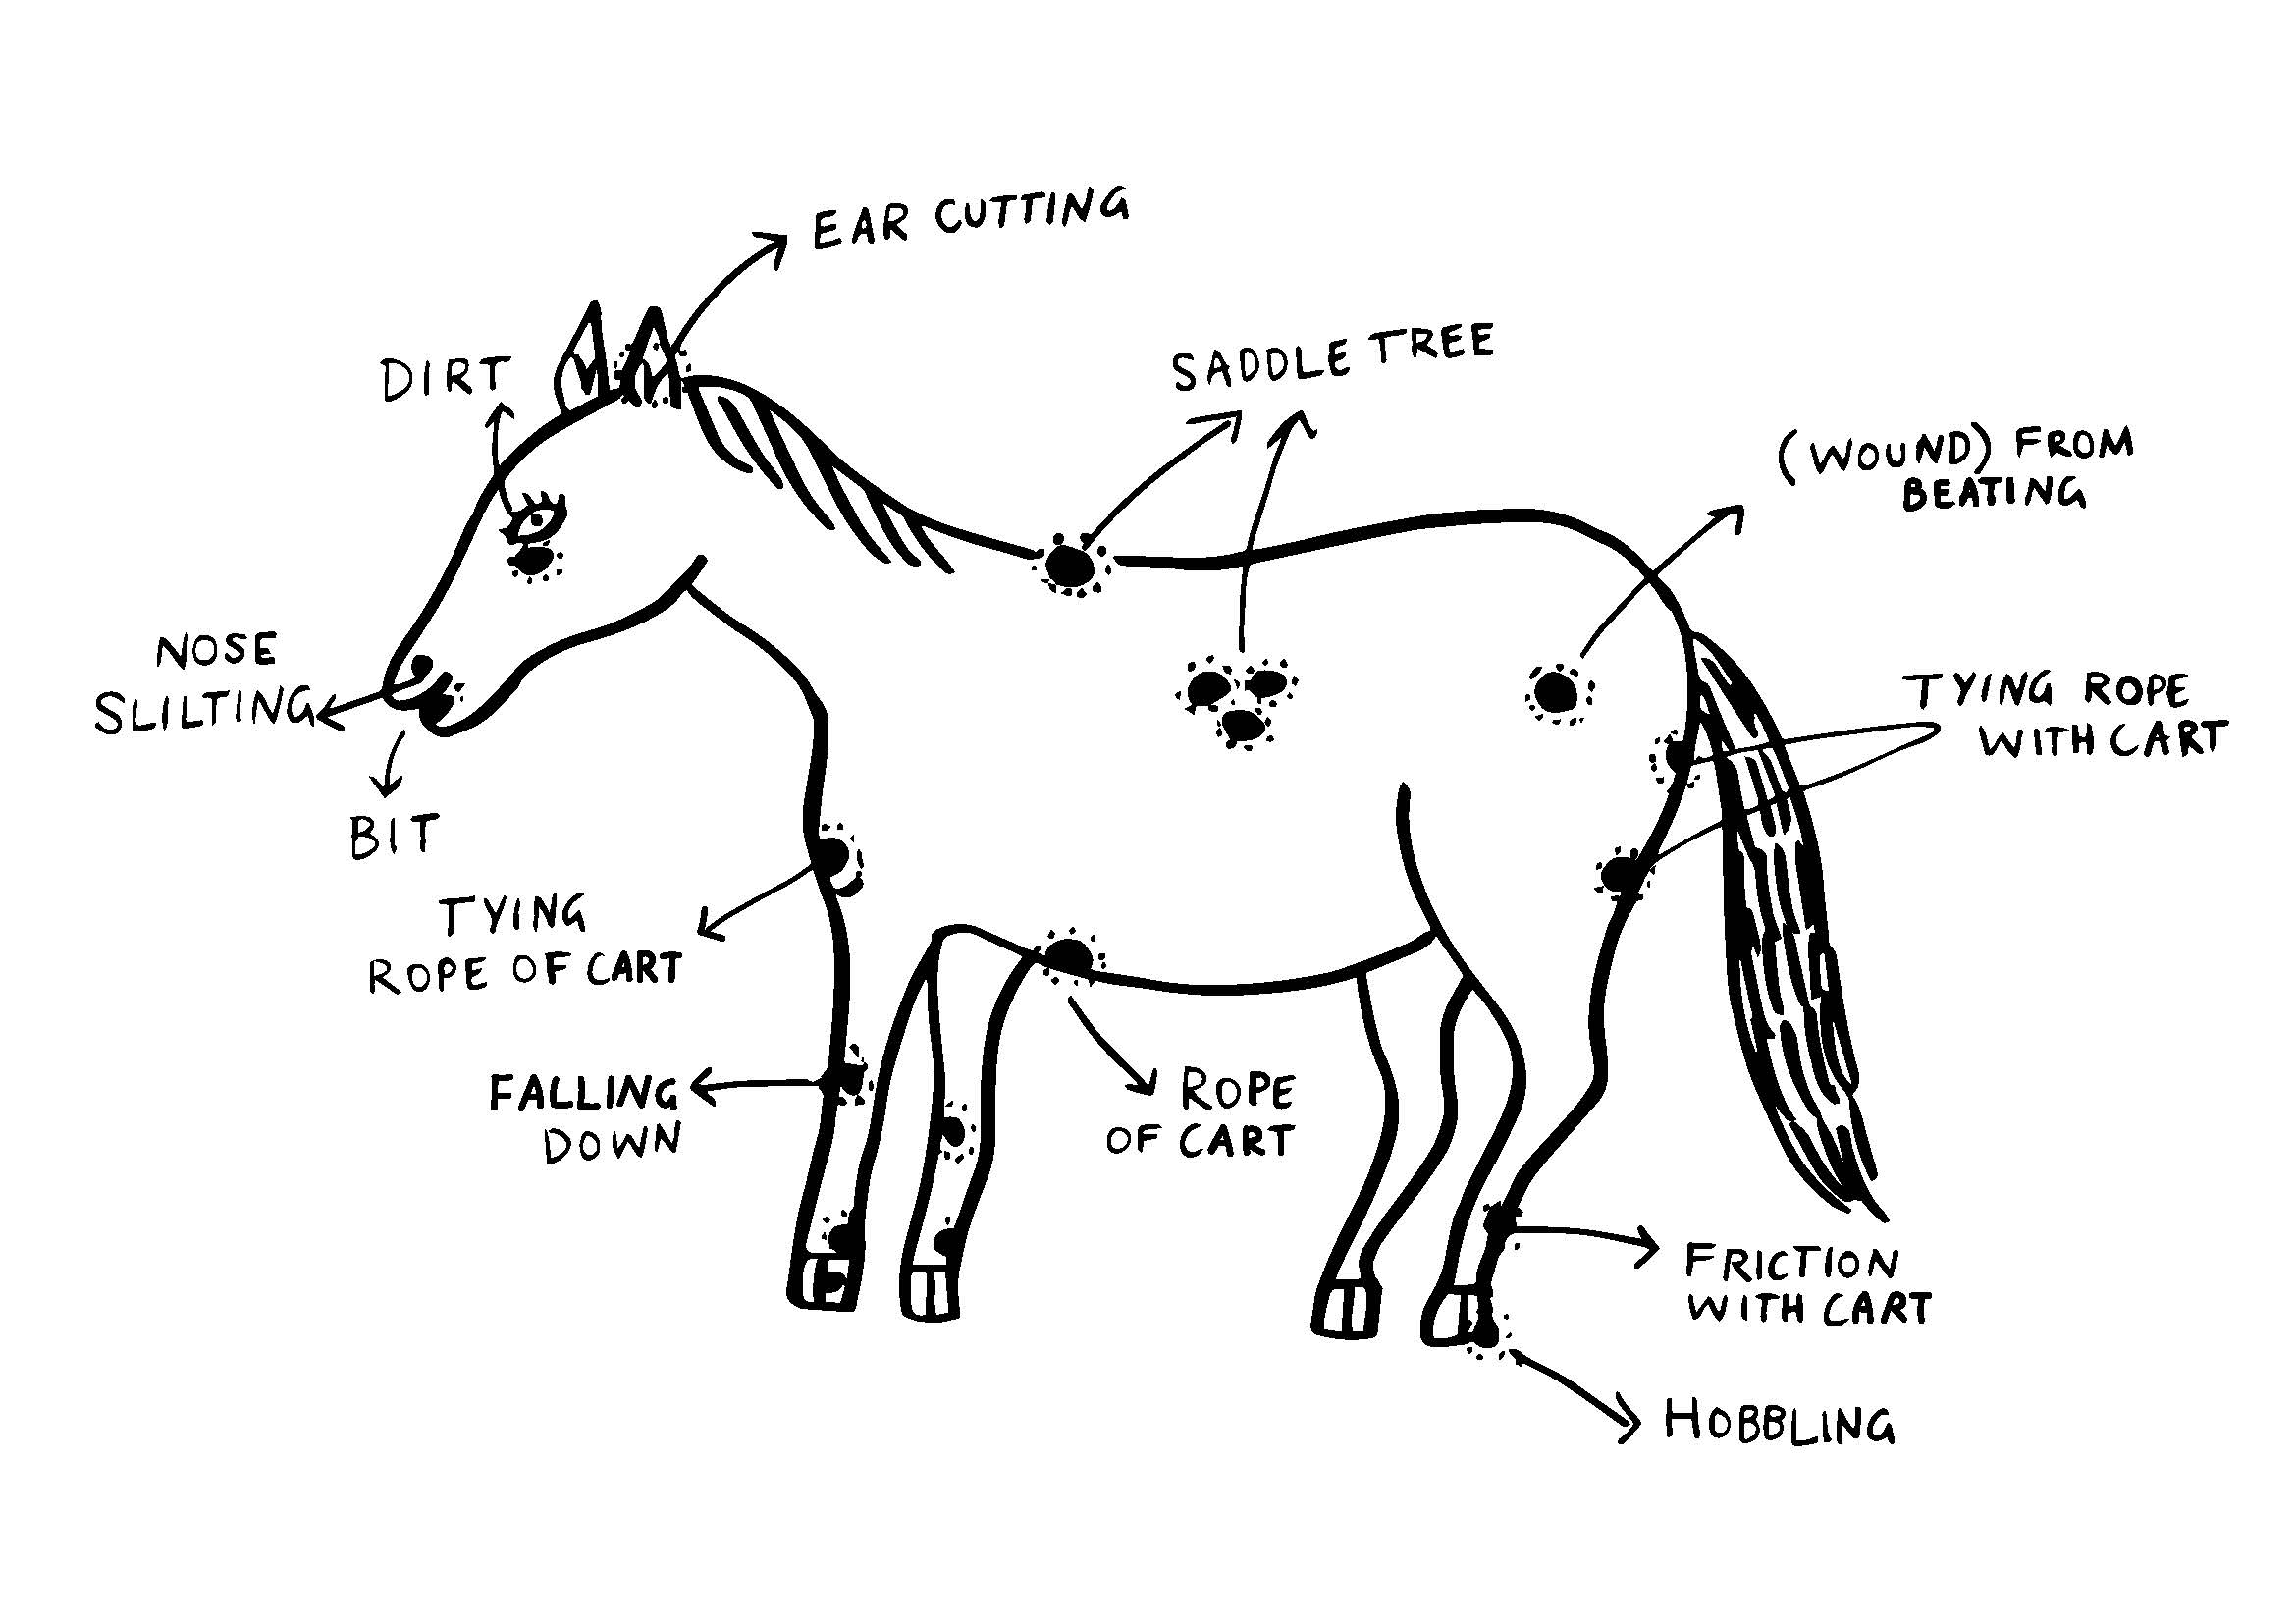 Figure T20b Animal body issue map, indicating body issues and causes on a working horse